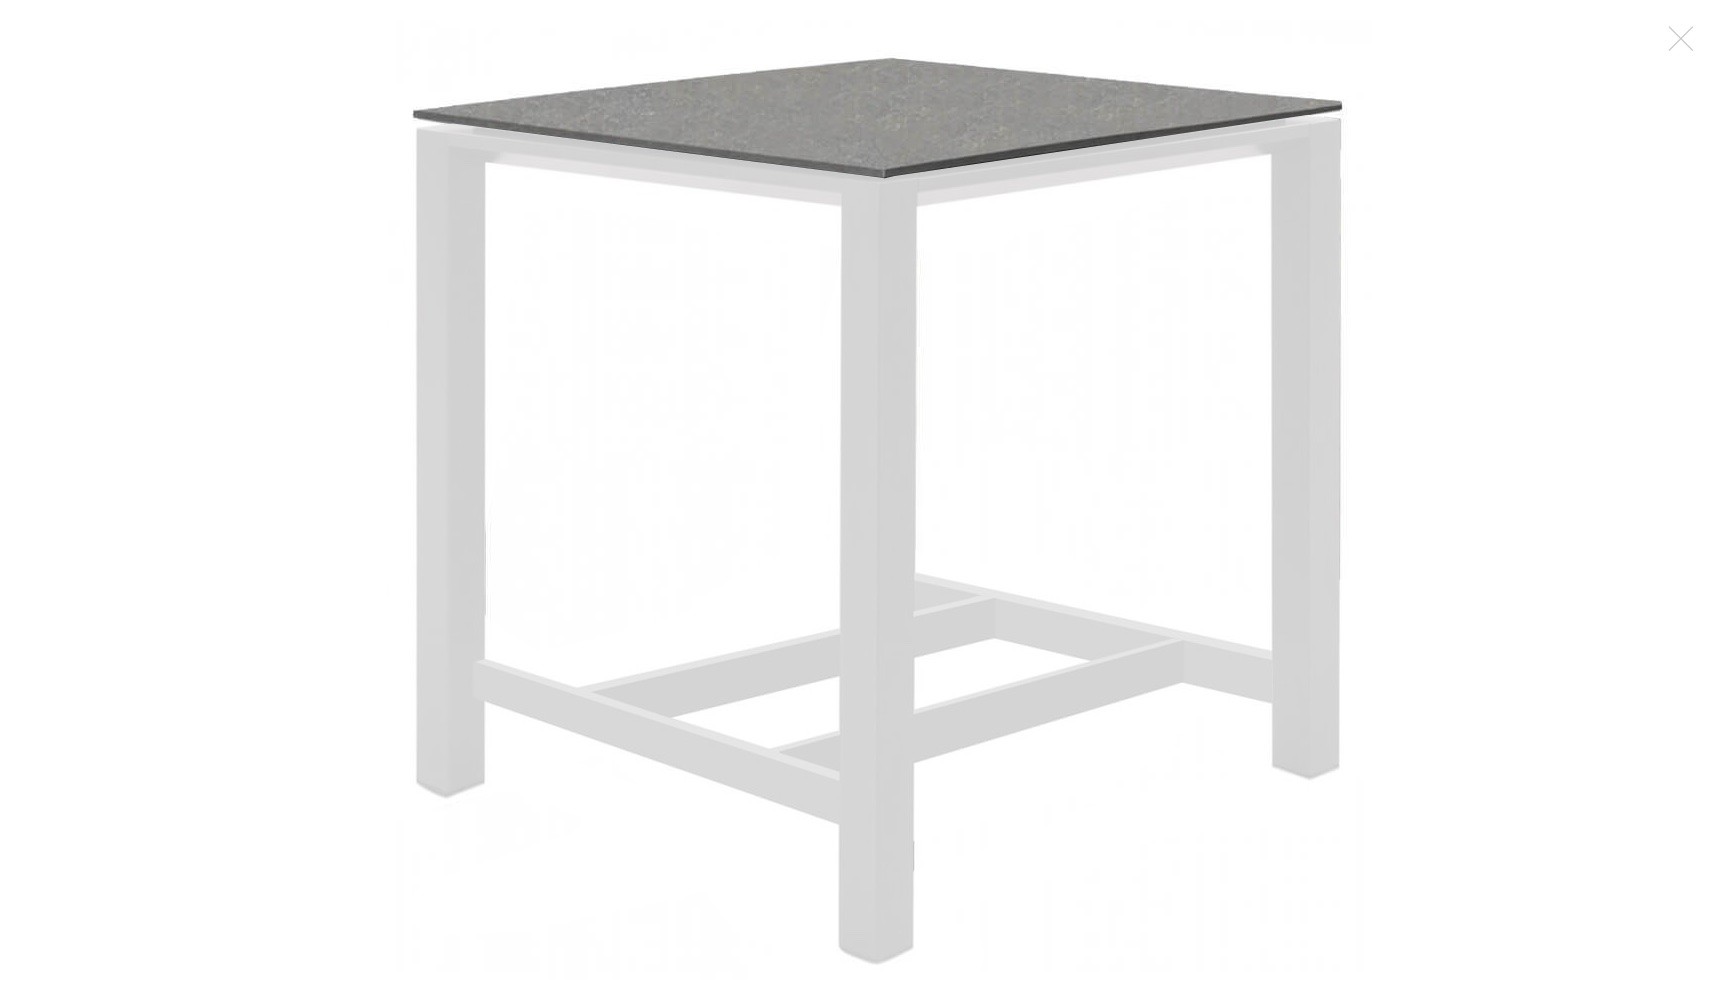 CONCEPT 36″ SQAURE BAR TABLE-WHITE
0037-225-241
